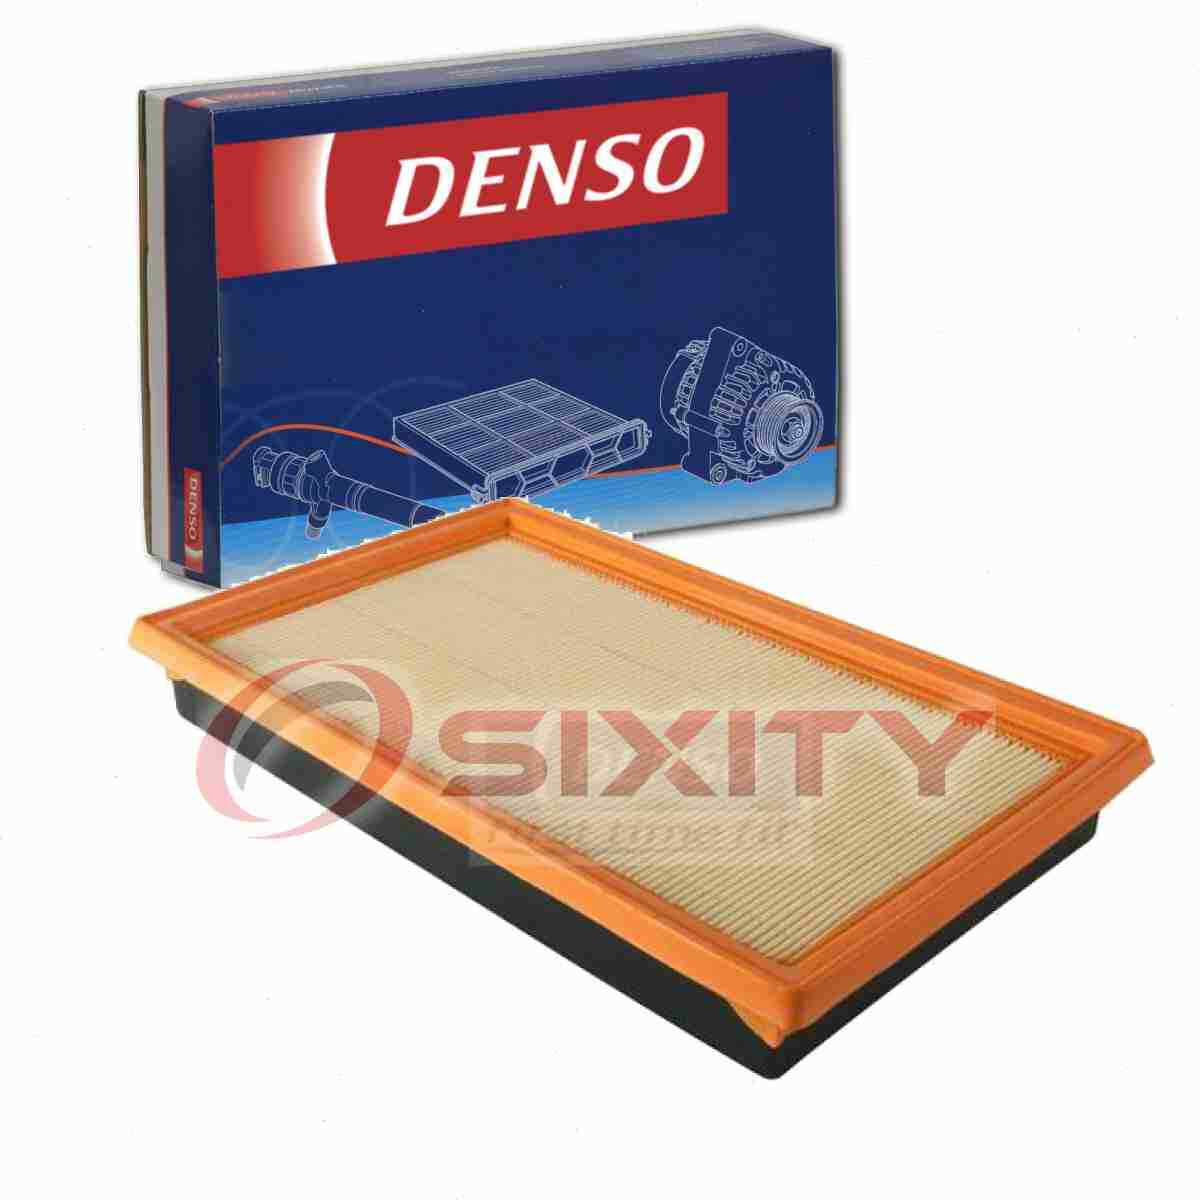 DENSO 143-3200 Air Filter for CA4309 A24278 46116 16546 AA080 16546 AA020 ah